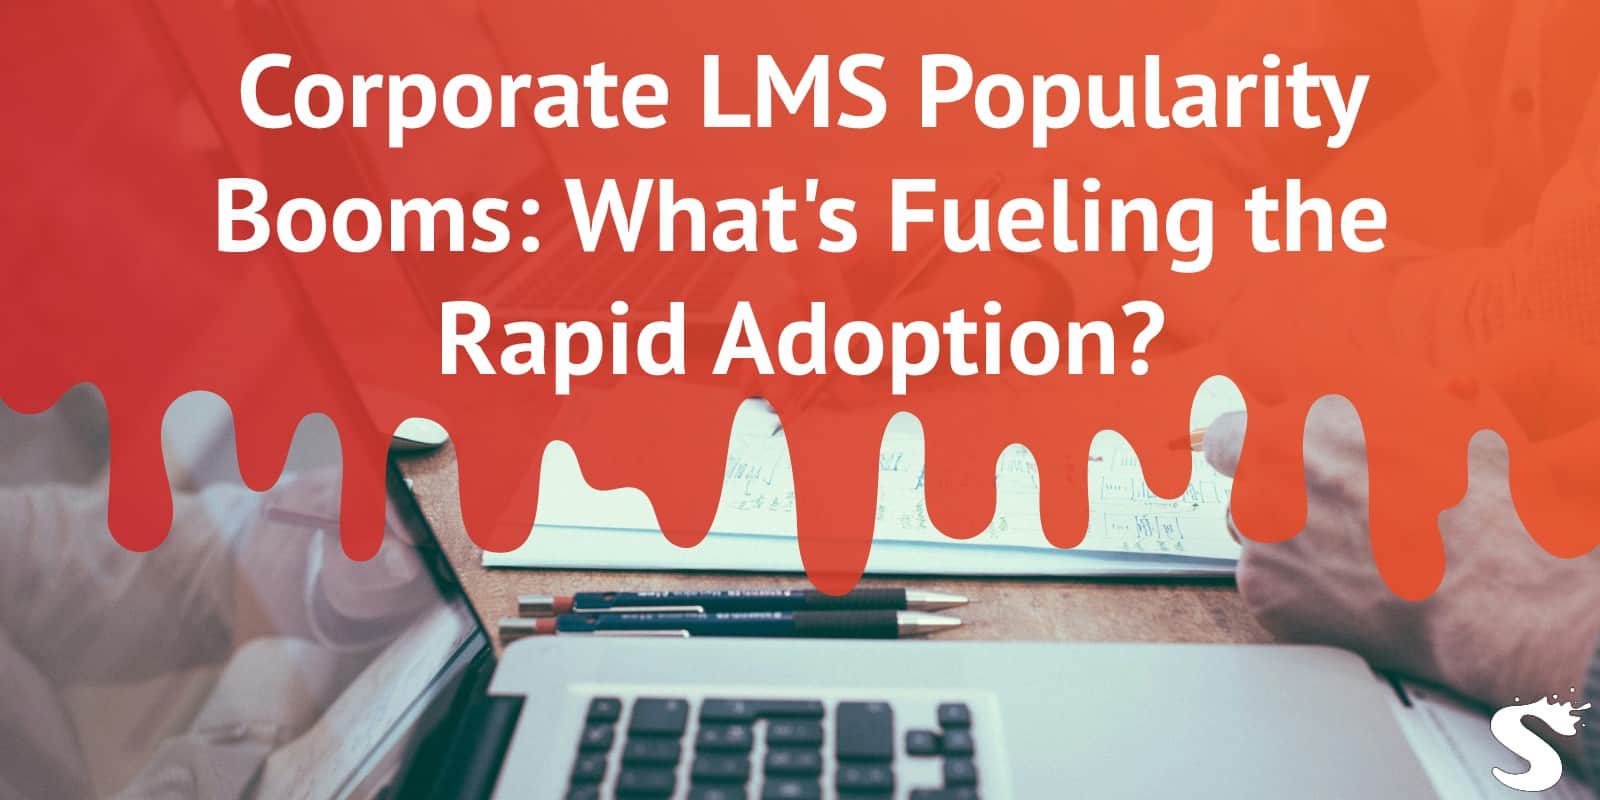 Corporate LMS Popularity Booms: What's Fueling the Rapid Adoption?